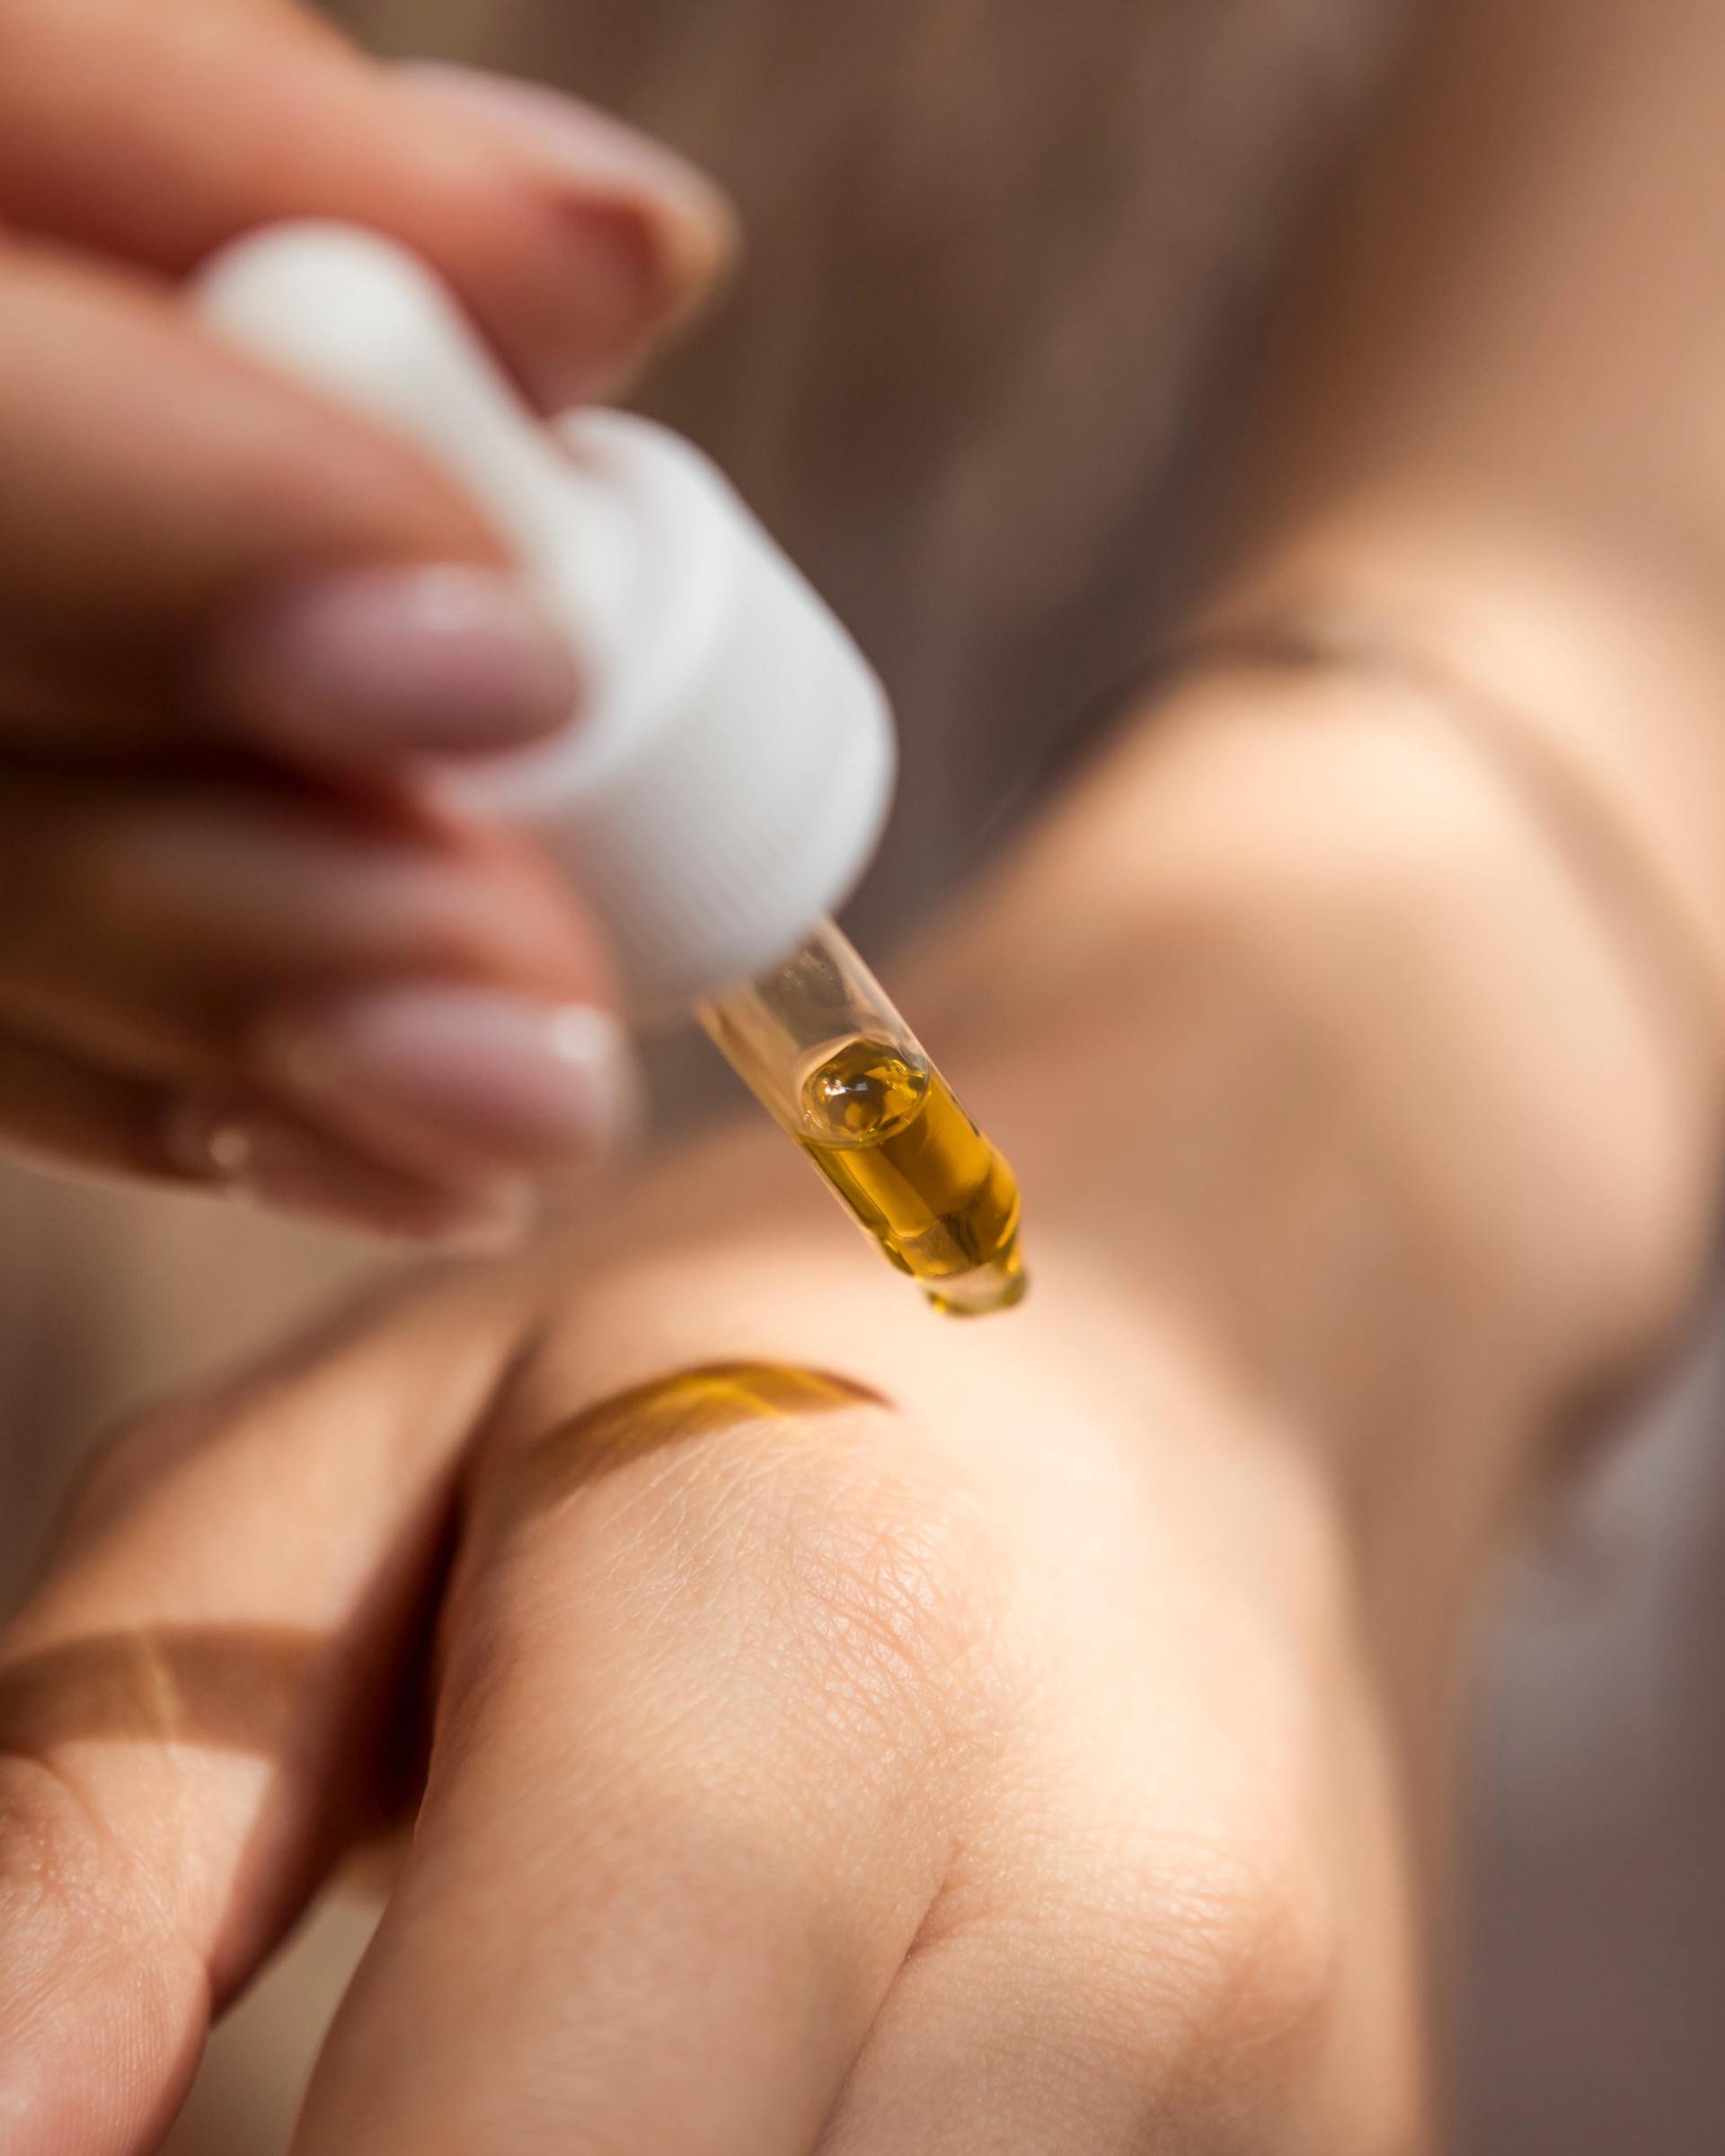 Why Is CBD Oil Reported to be Good for Healthier Skin?